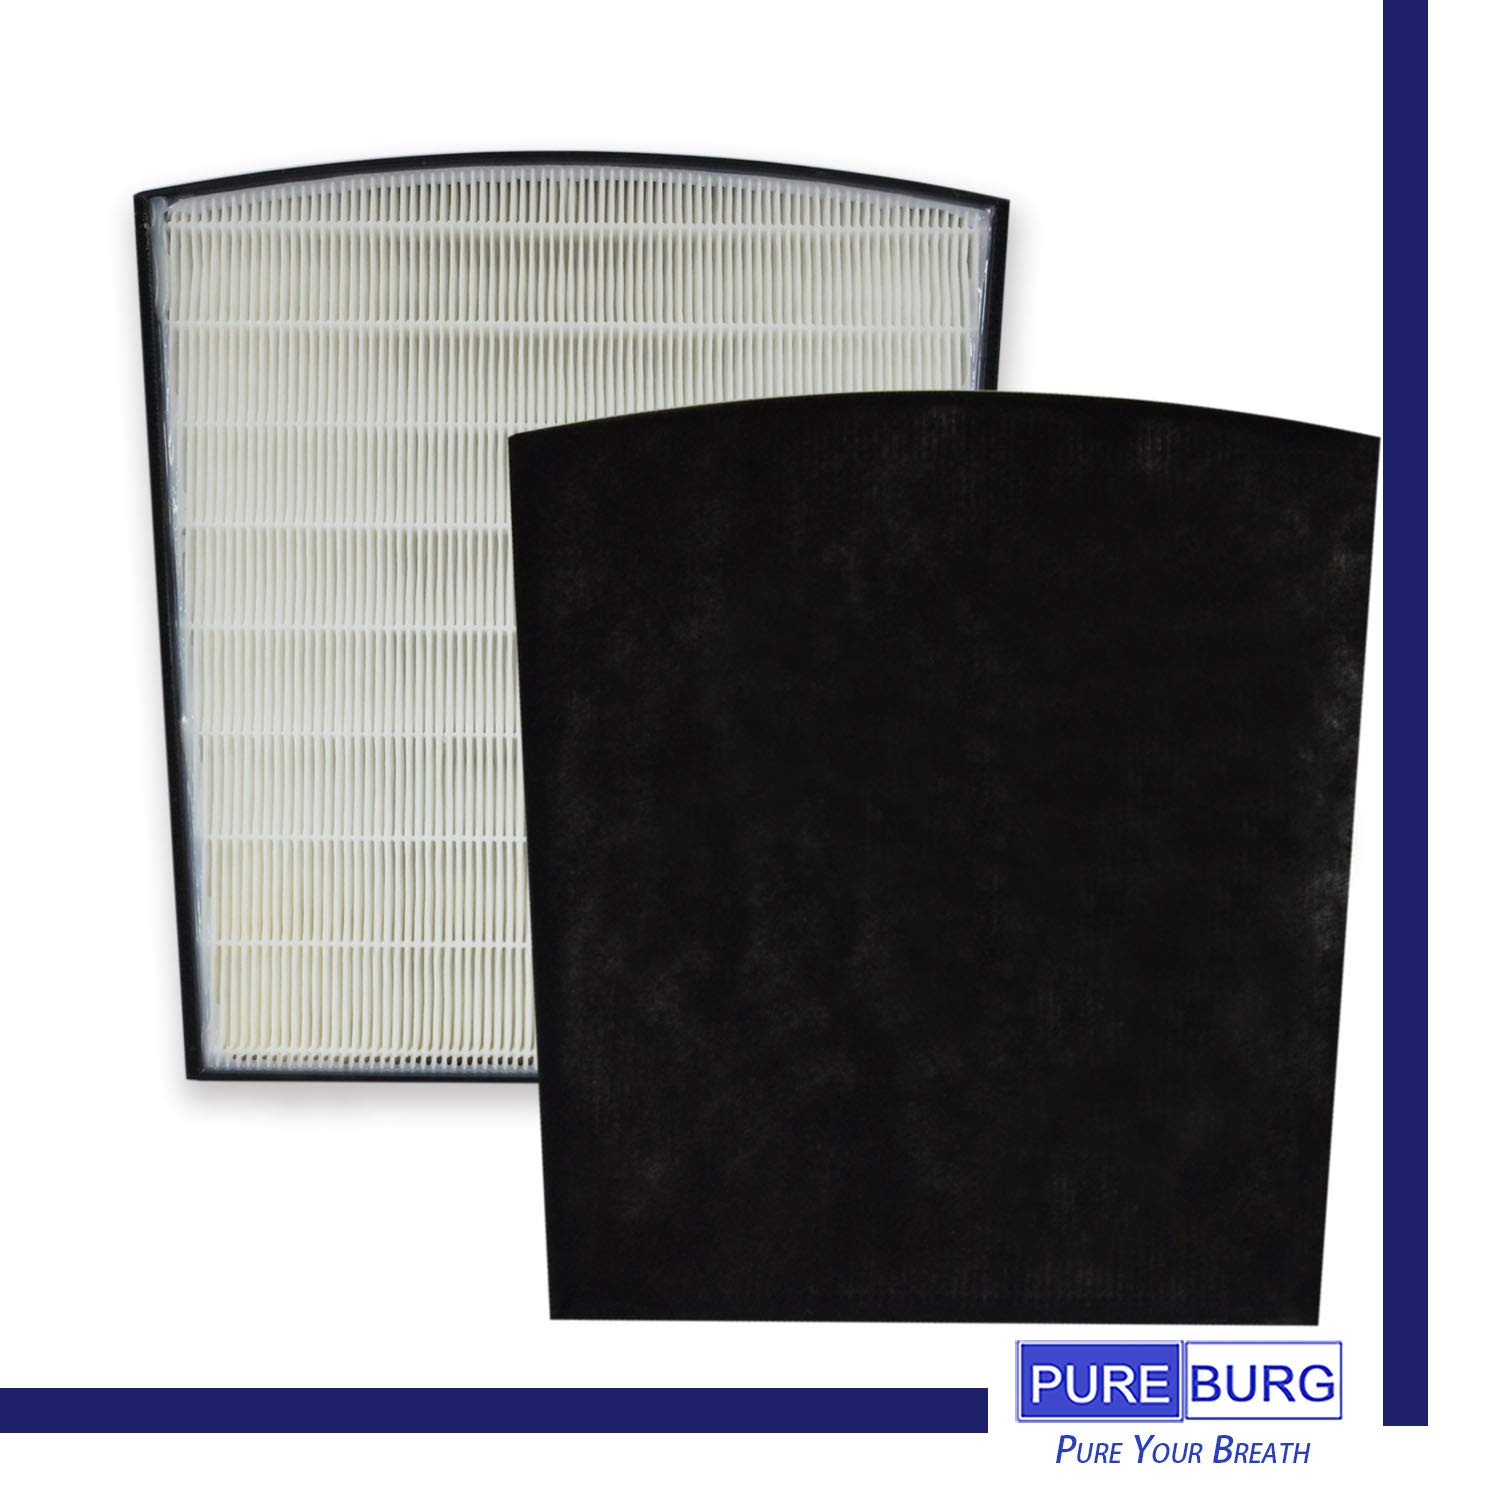 PUREBURG Replacement True HEPA Filter Set Compatible with Hunter HP800 Multi Room Large Console Air Purifier, Part Number H-HF800-VP H-PF800,H13 Activated carbon Pre-Filter Air Clean Dust VOCs